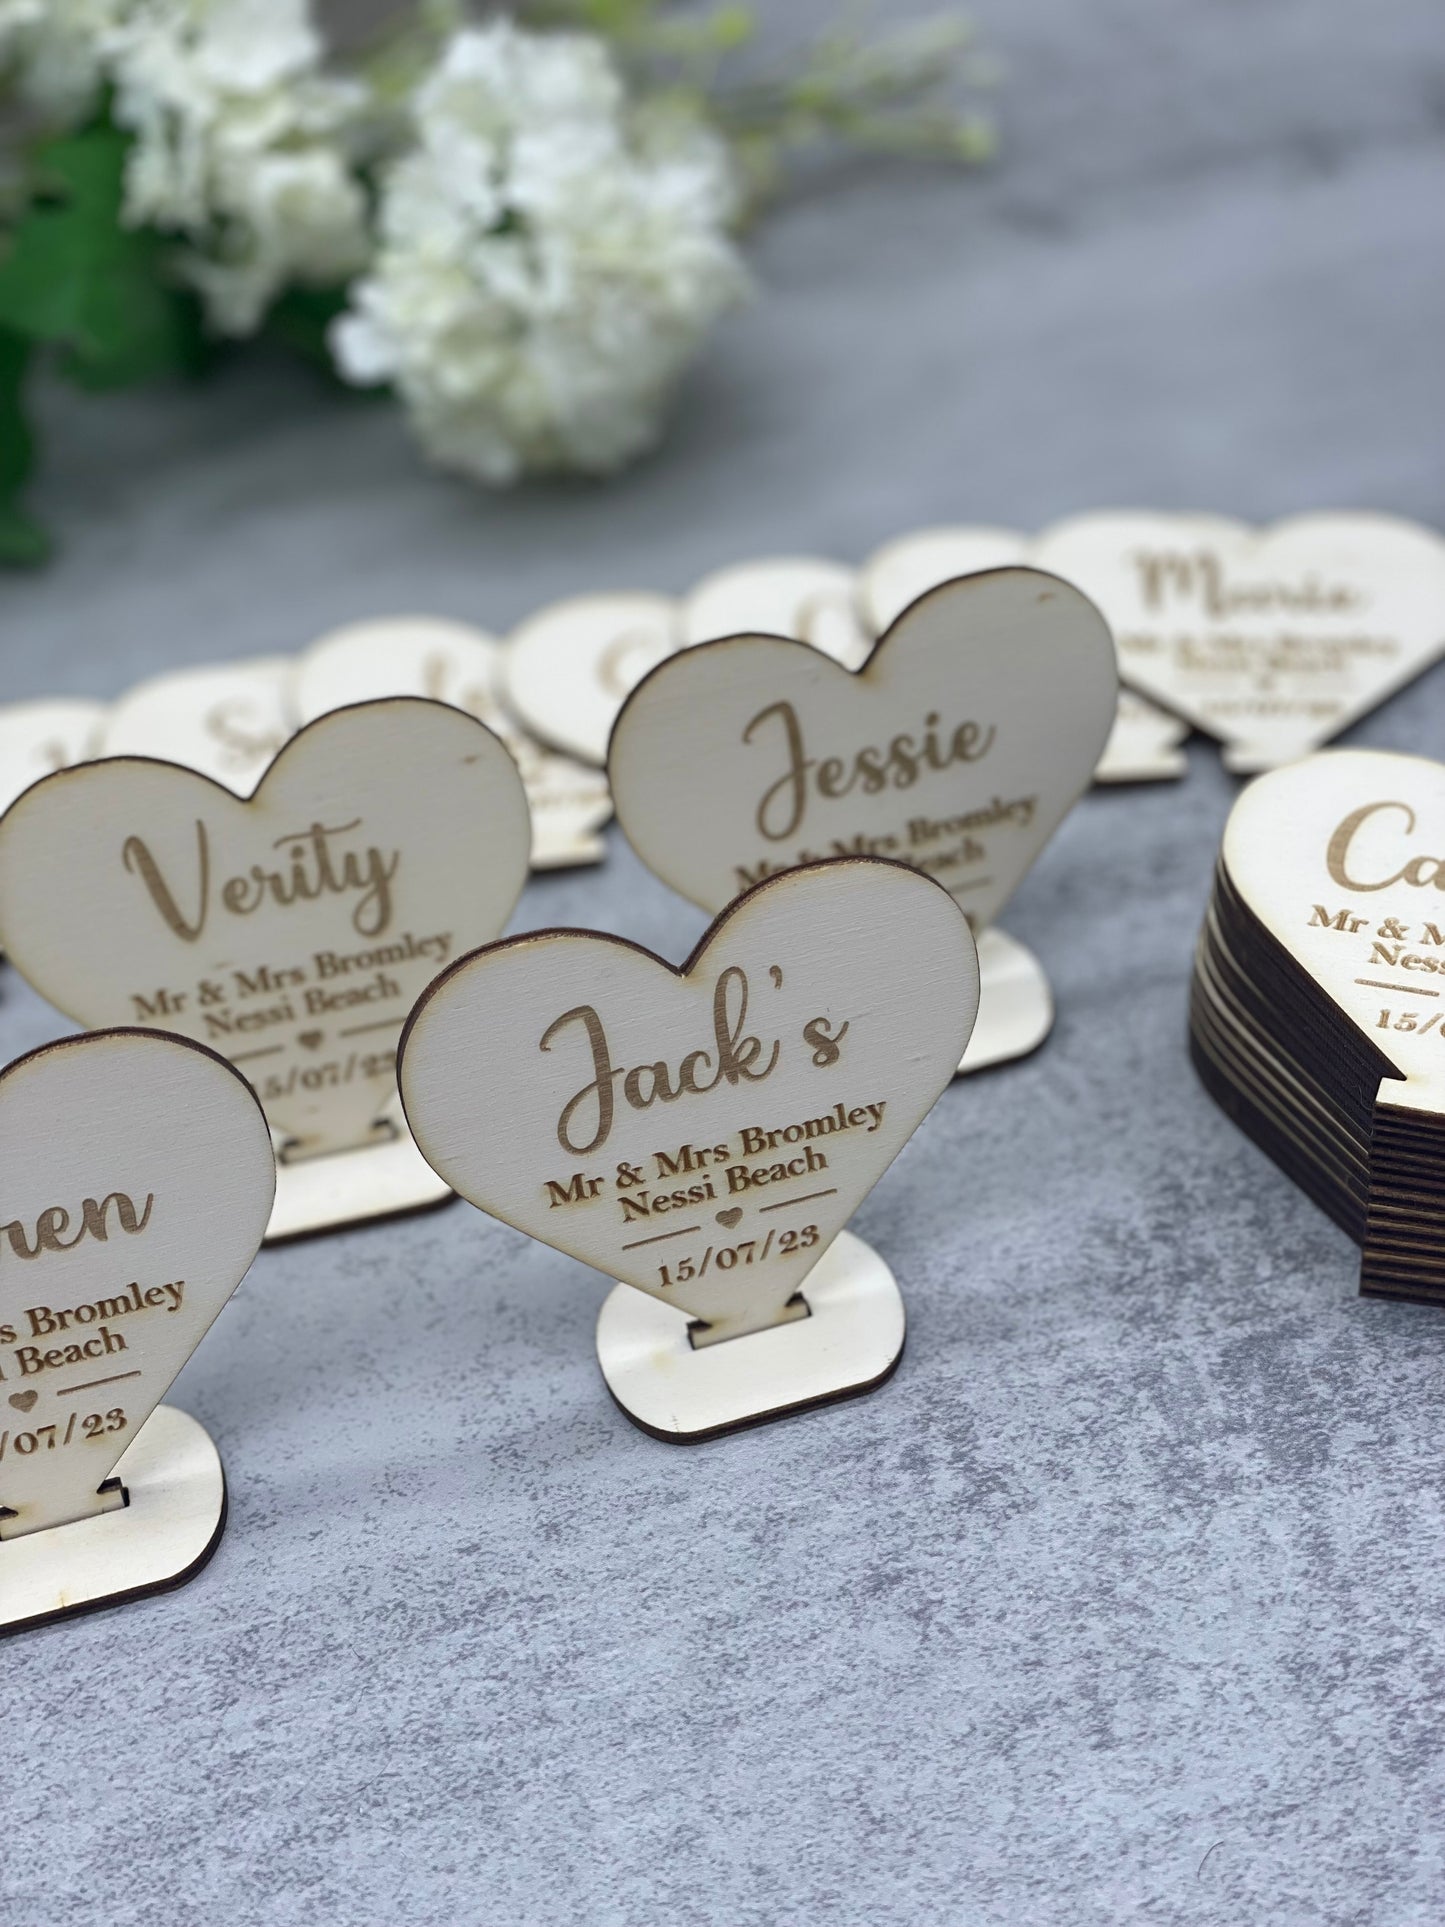 Wedding Place Settings | Place Names | Baby Shower Names